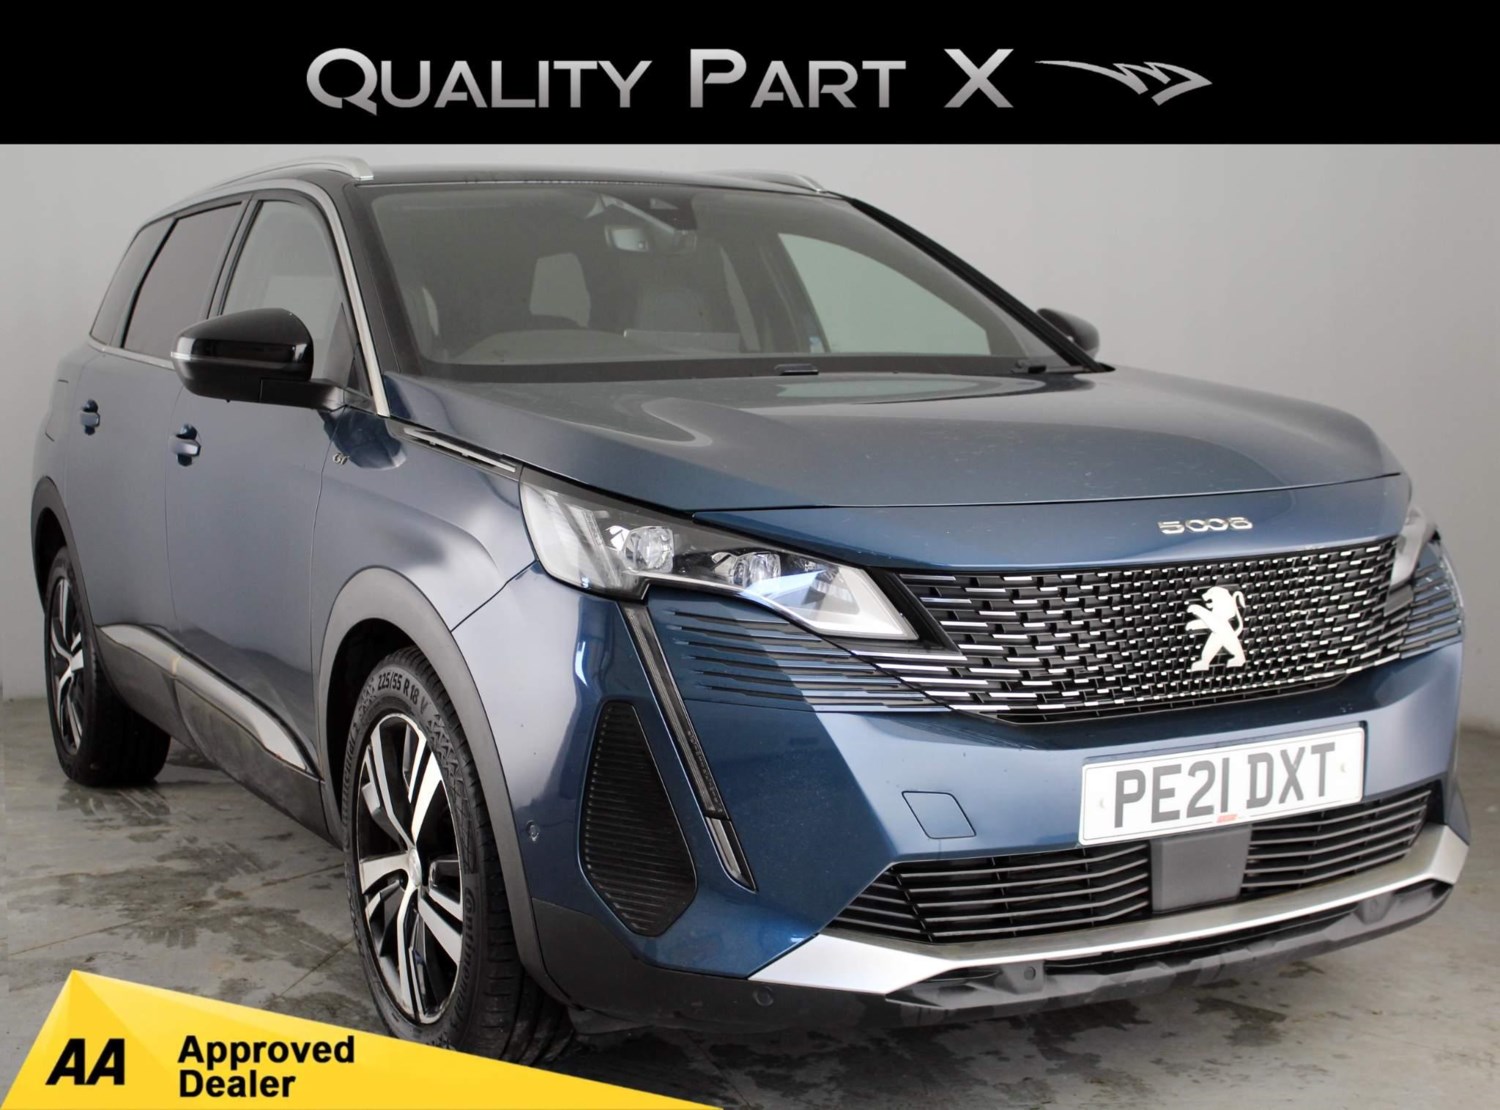 2021 used Peugeot 5008 1.5 BlueHDi GT Euro 6 (s/s) 5dr